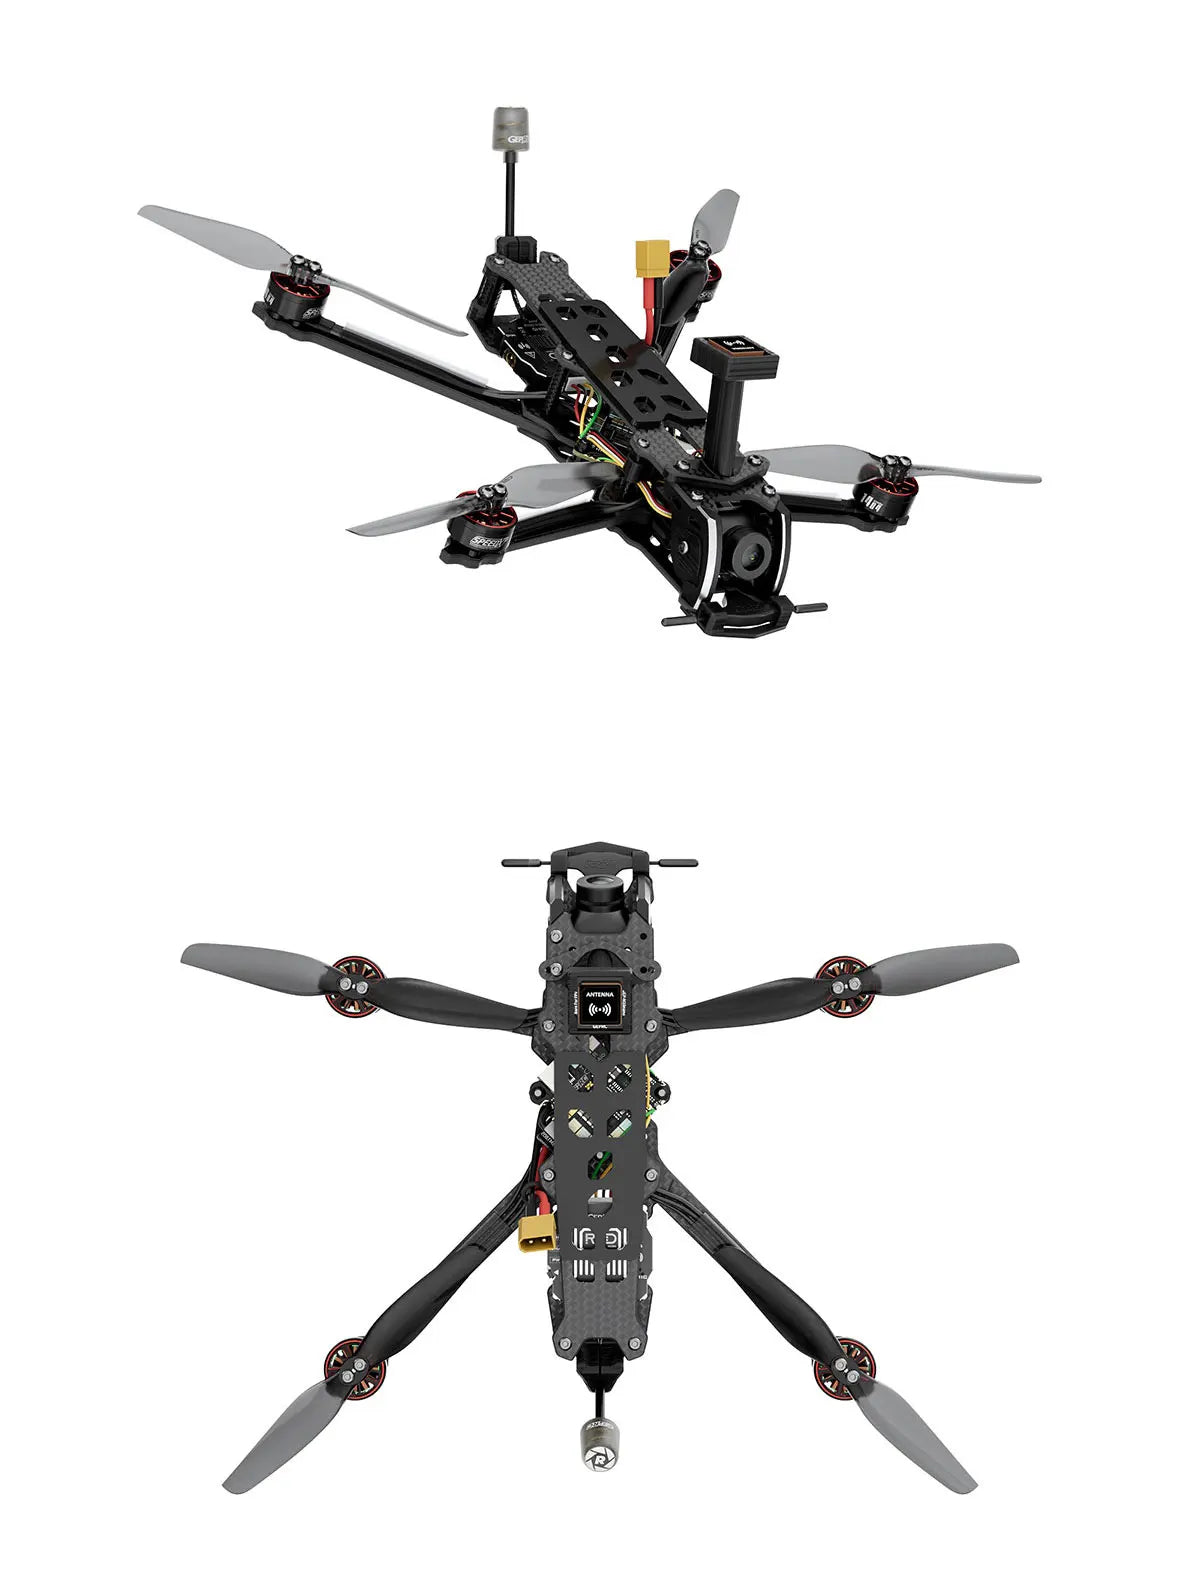 GEPRC Tern-LR40 Analog Long Range FPV, crashes when components have aged or been damaged .